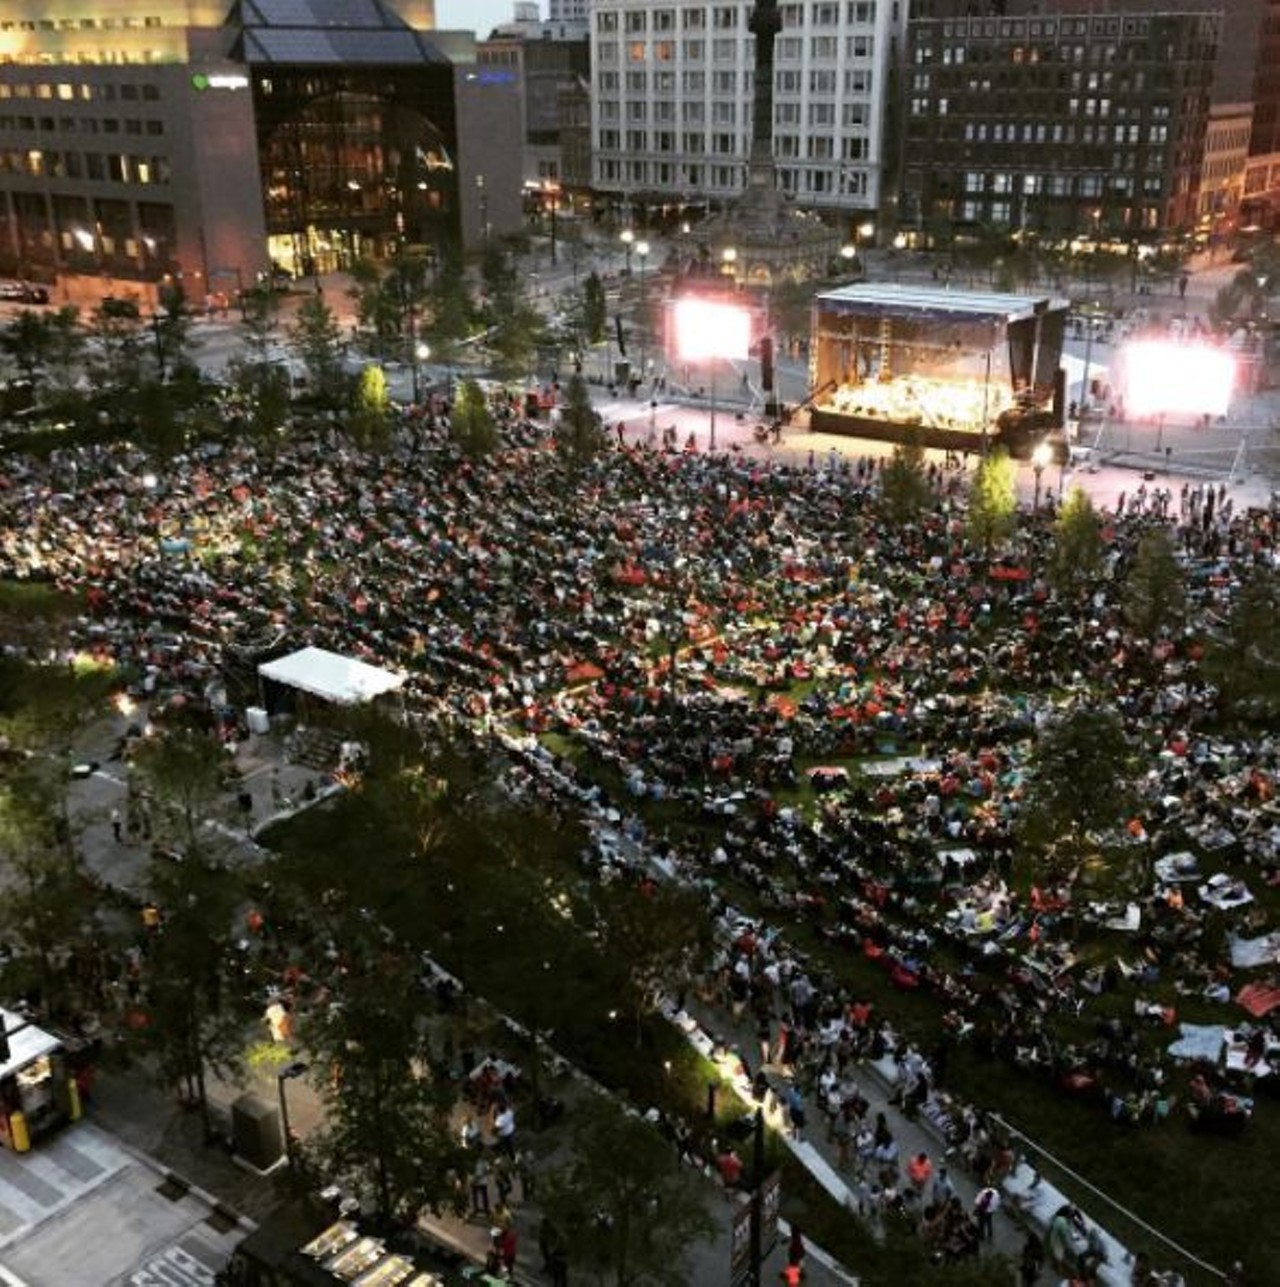  Cleveland Orchestra&#146;s Star-Spangled Spectacular
June 30
Mall B, 300 St. Clair Ave
You don't have to wait until July 4 to celebrate &#151; revel in some musical patriotism at the Cleveland Orchestra's free concert downtown June 30.
Photo via clepublicsquare/Instagram